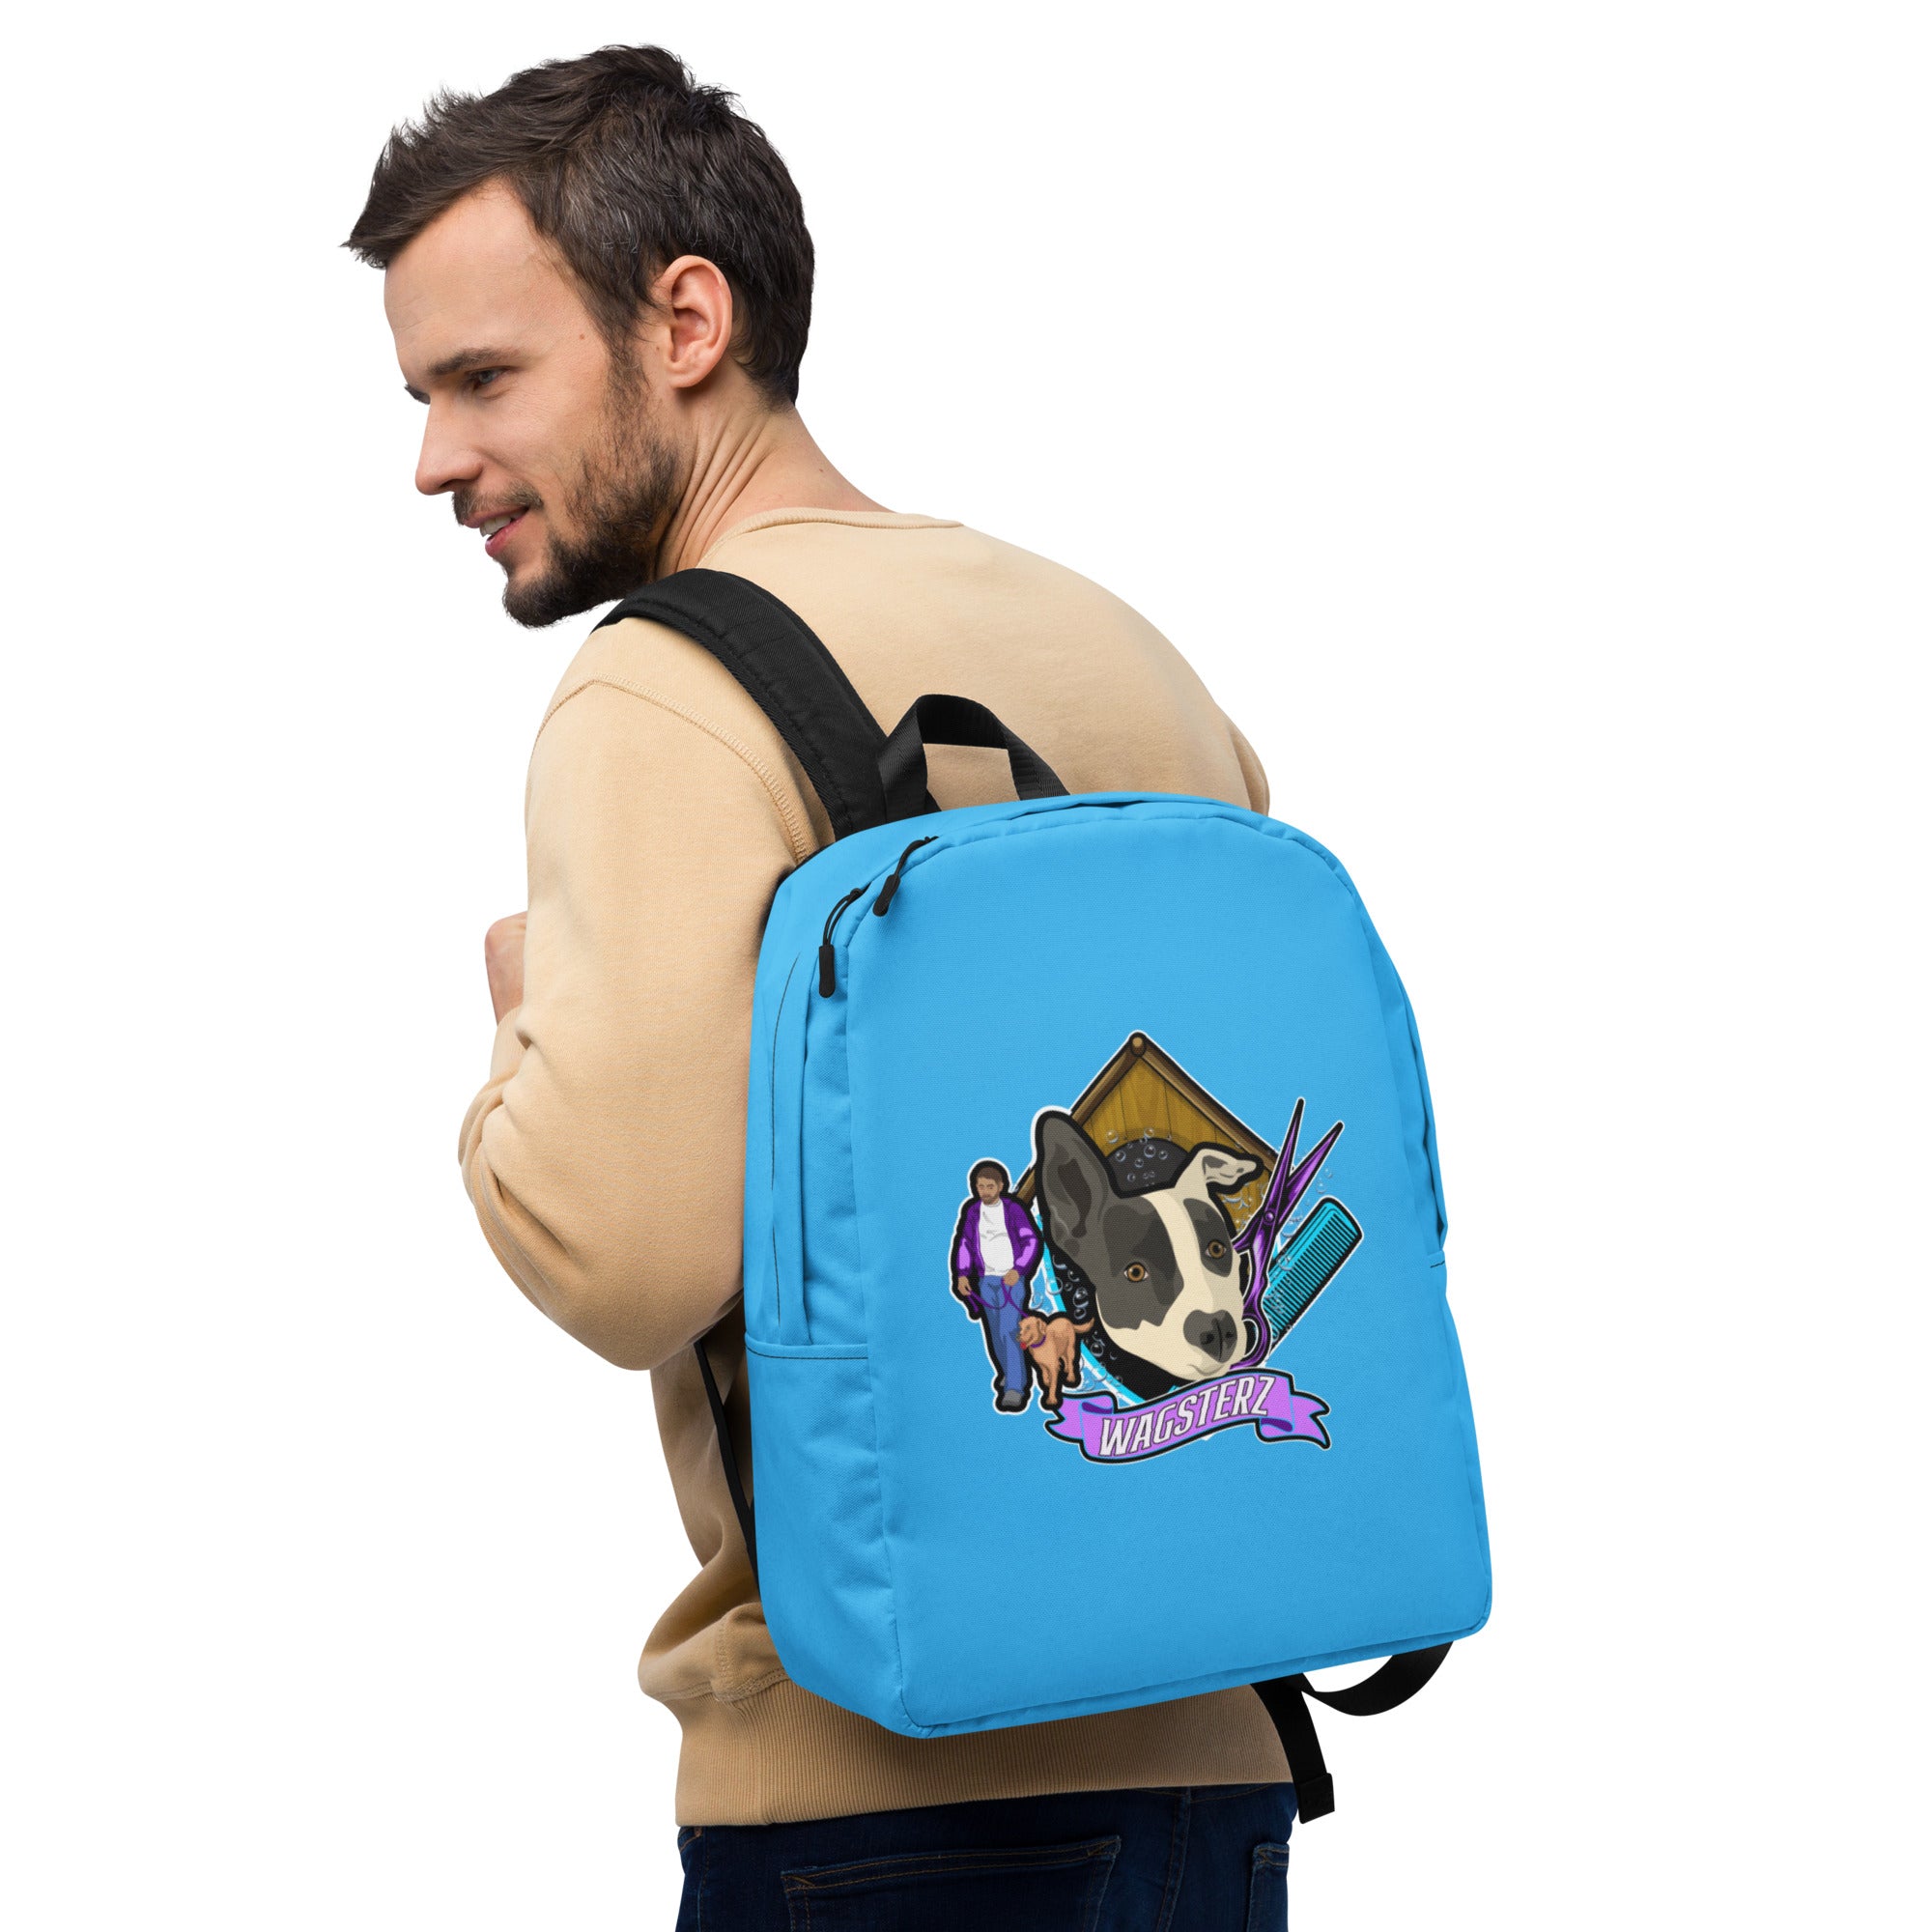 Wagsterz Backpack